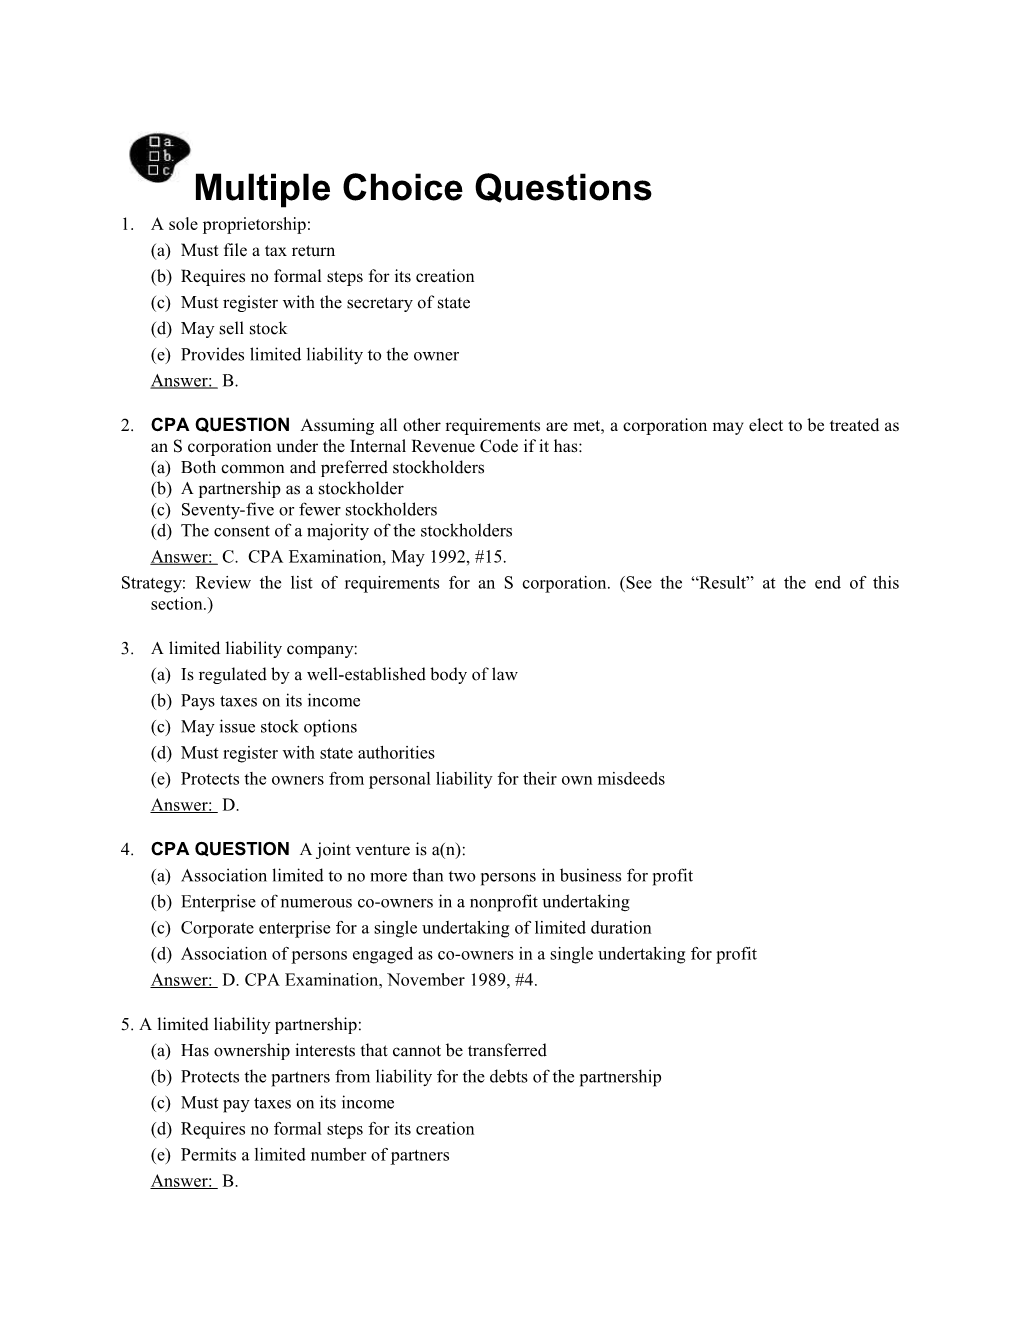 Multiple Choice Questions s9